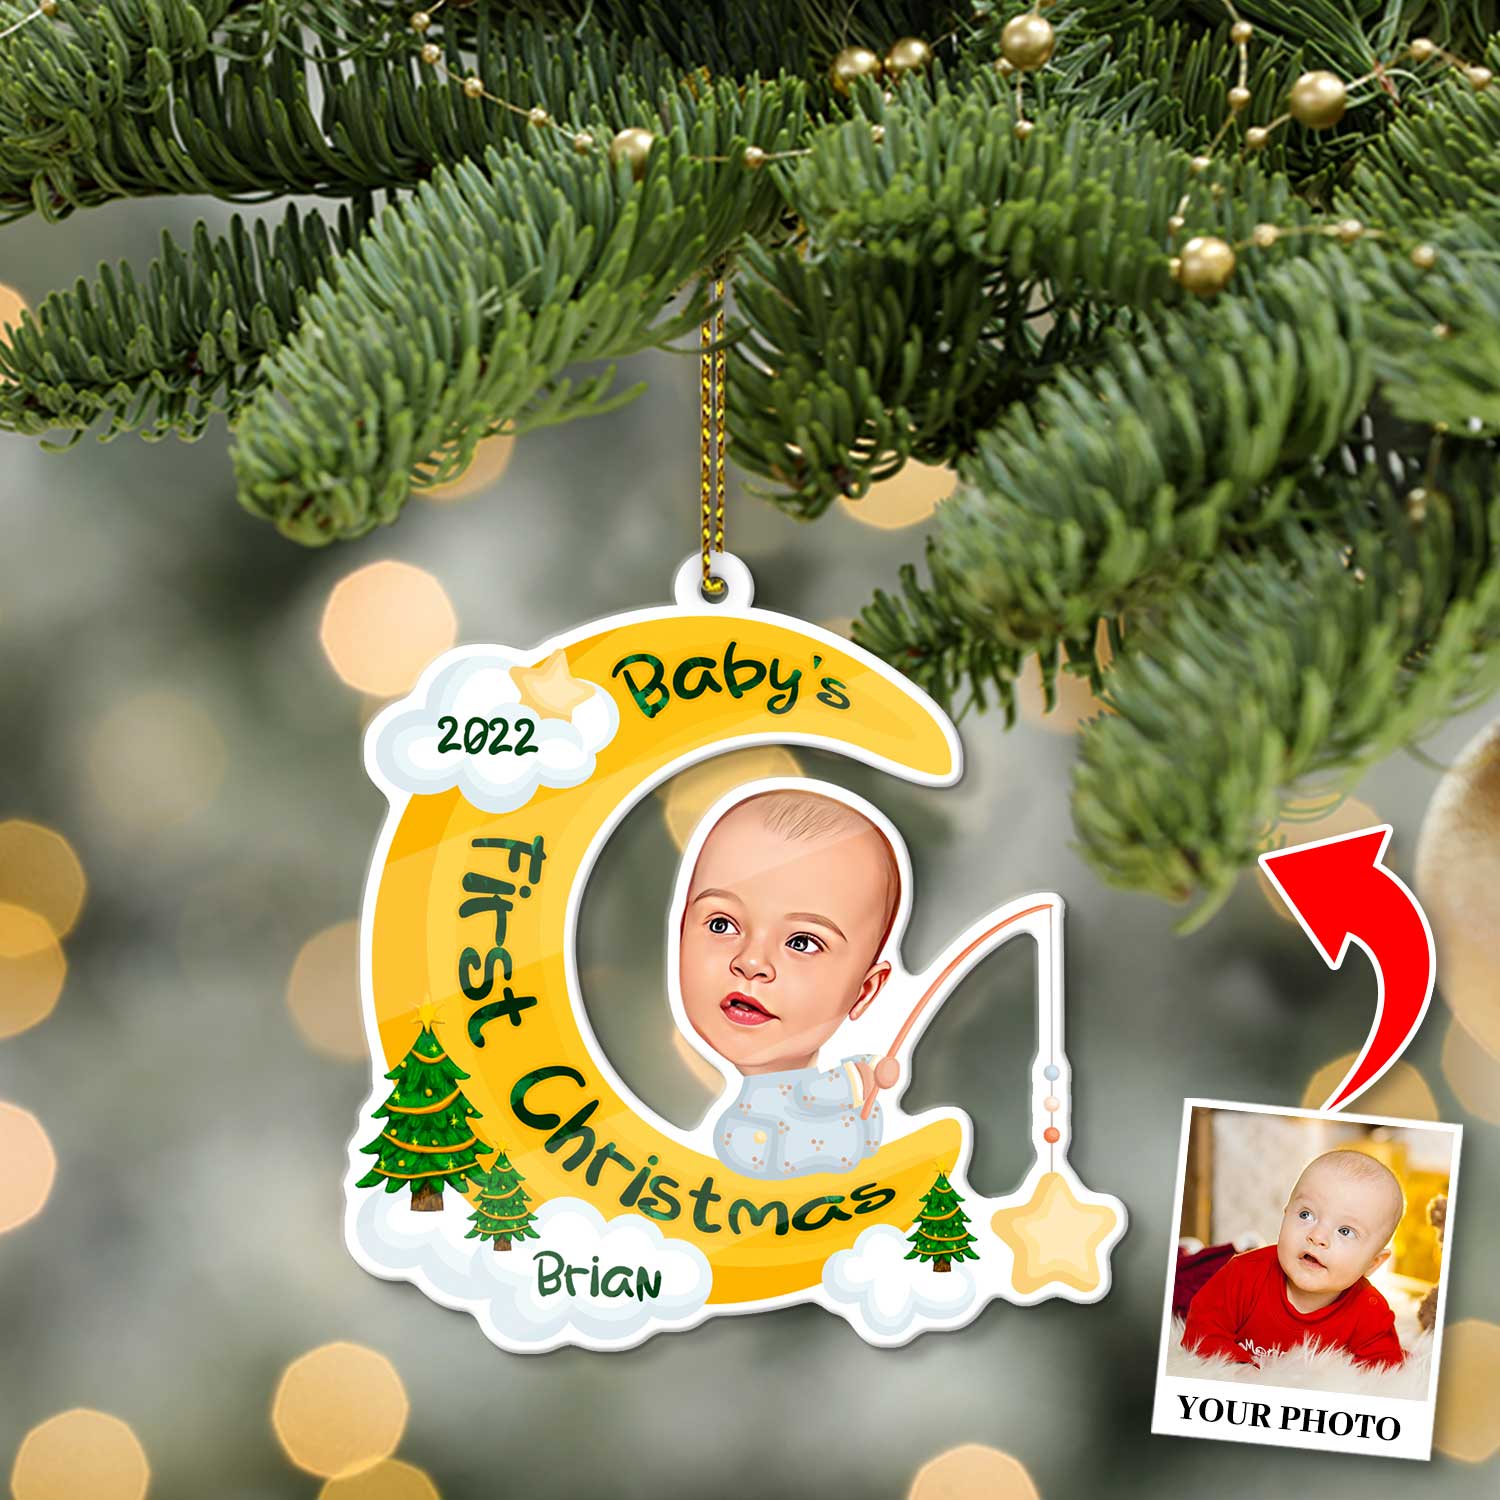 Personalized Name And Photo, Ornament For Baby, Baby's First Christmas, Baby Moon, Christmas Shape Ornament 2 Sides